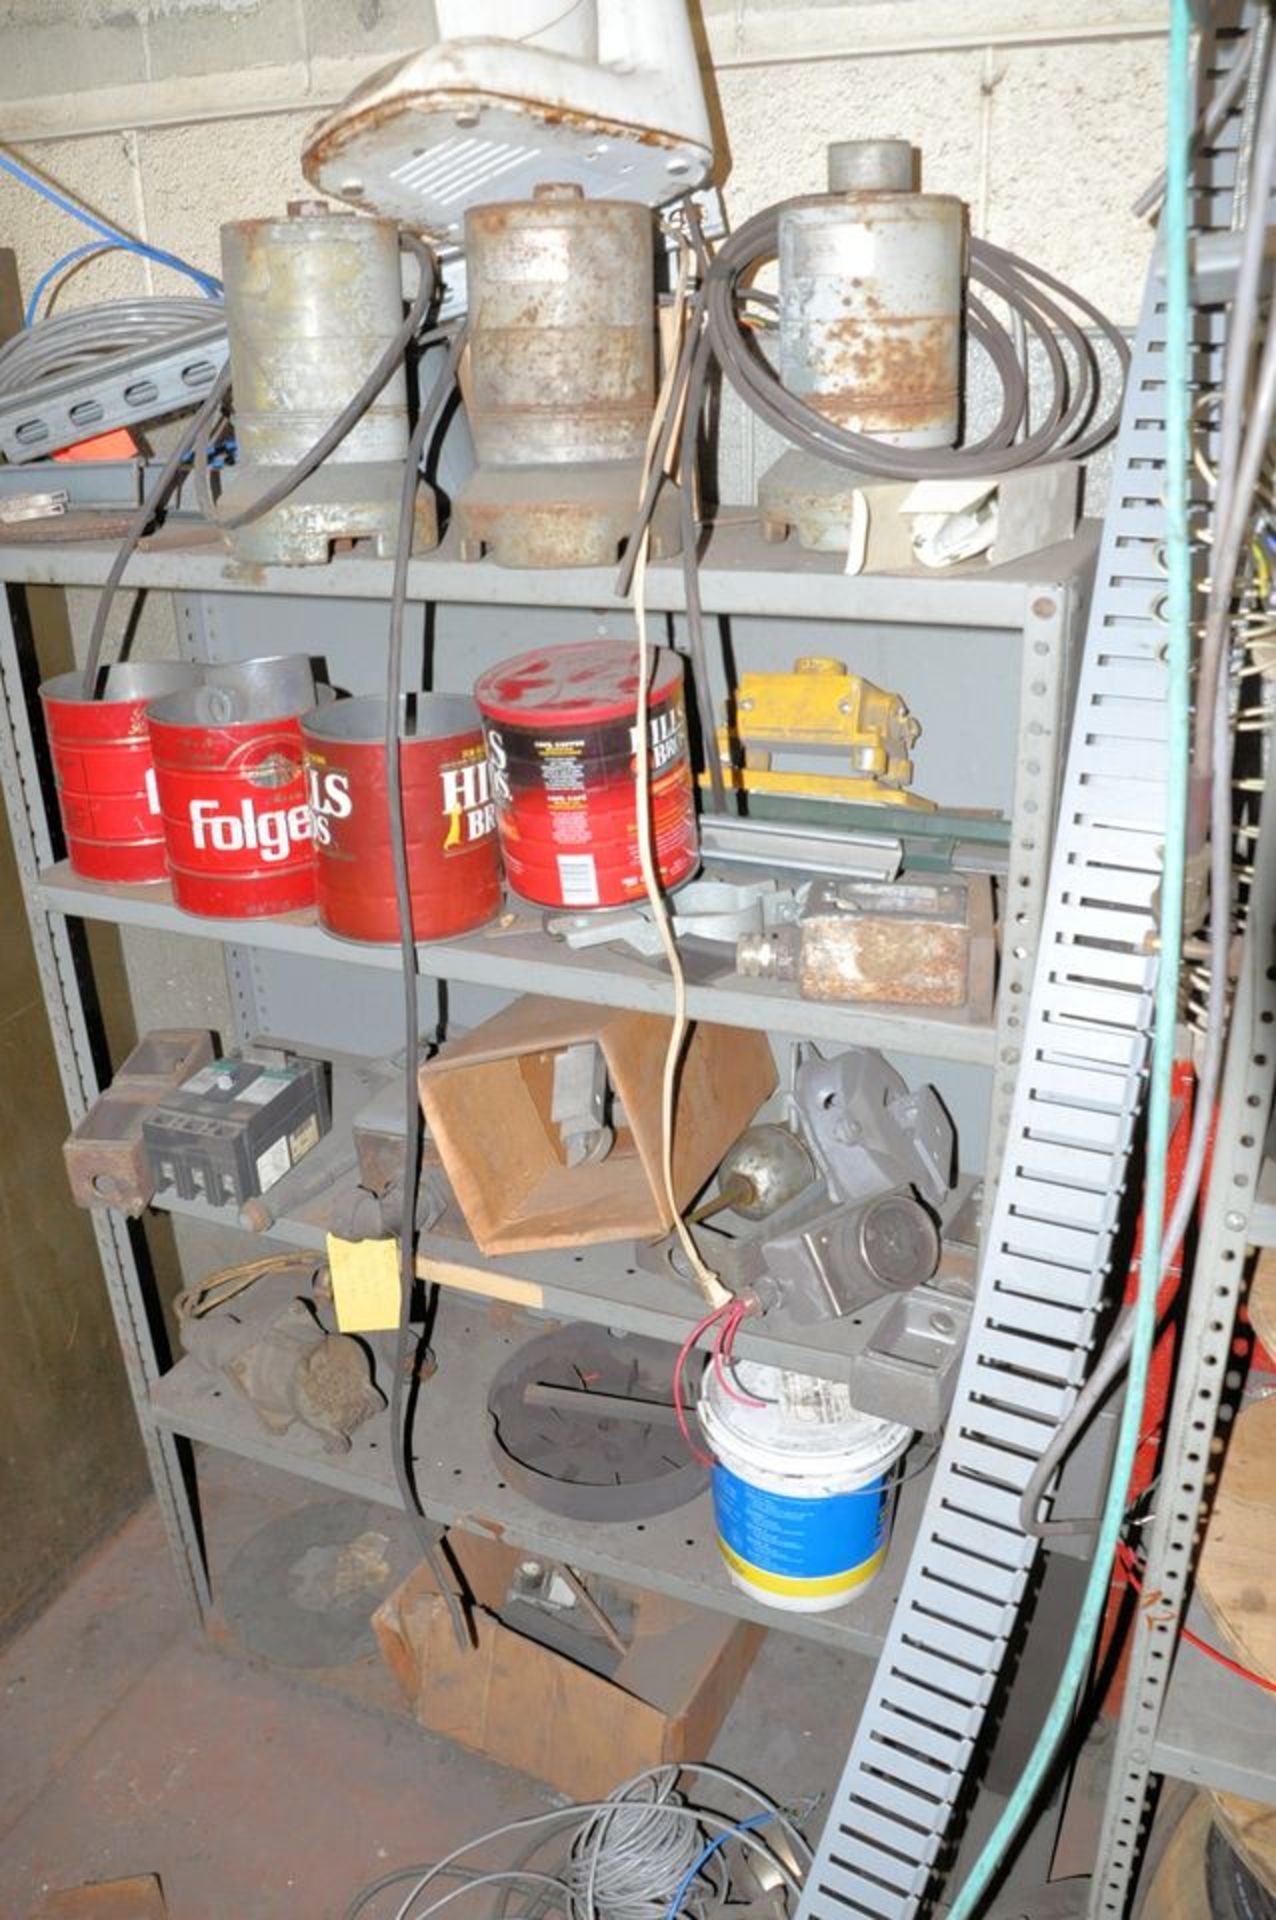 Lot - Electrical Work Boxes, Wire Spools, Various Electrical Components, Shelving, Harnesses and - Image 11 of 13